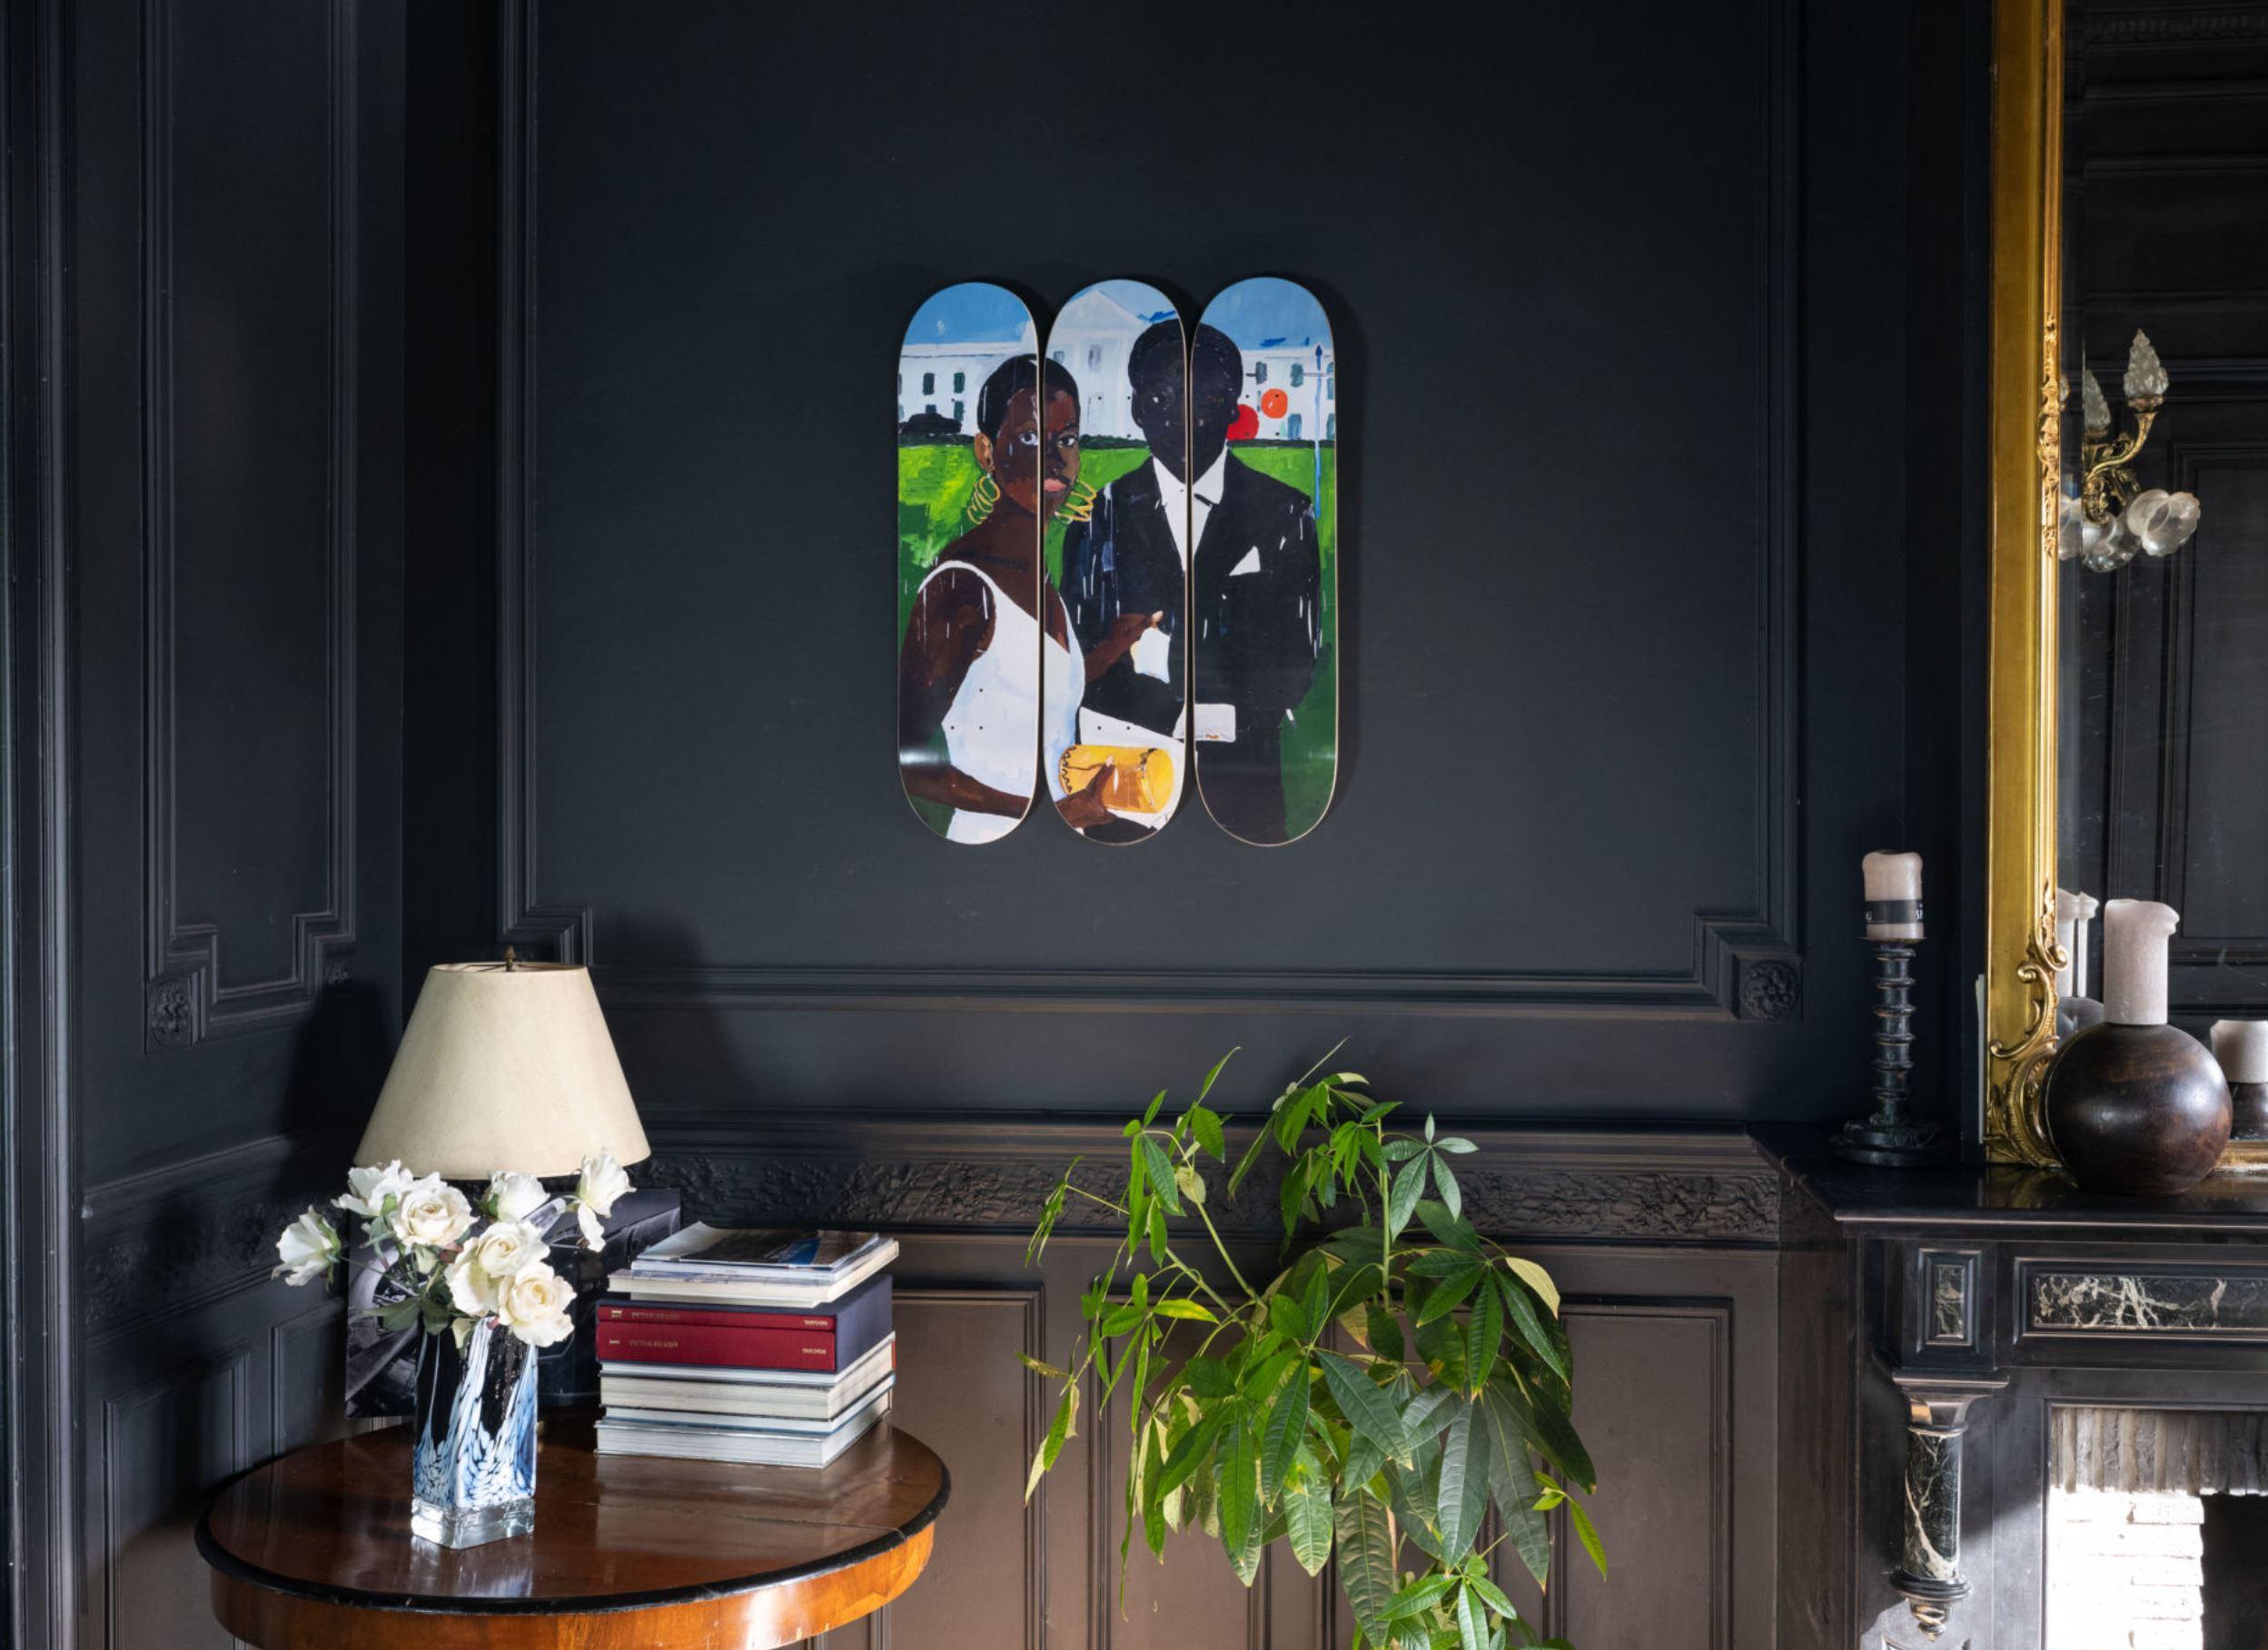 Available in a limited edition of 100, Cicely and Miles Visit the Obamas, captures a scene where Miles Davis and Cicely Tyson, stand in front of the White House. Describing the original work from 2017, Zadie Smith says ‘In this portrait, the Obamas